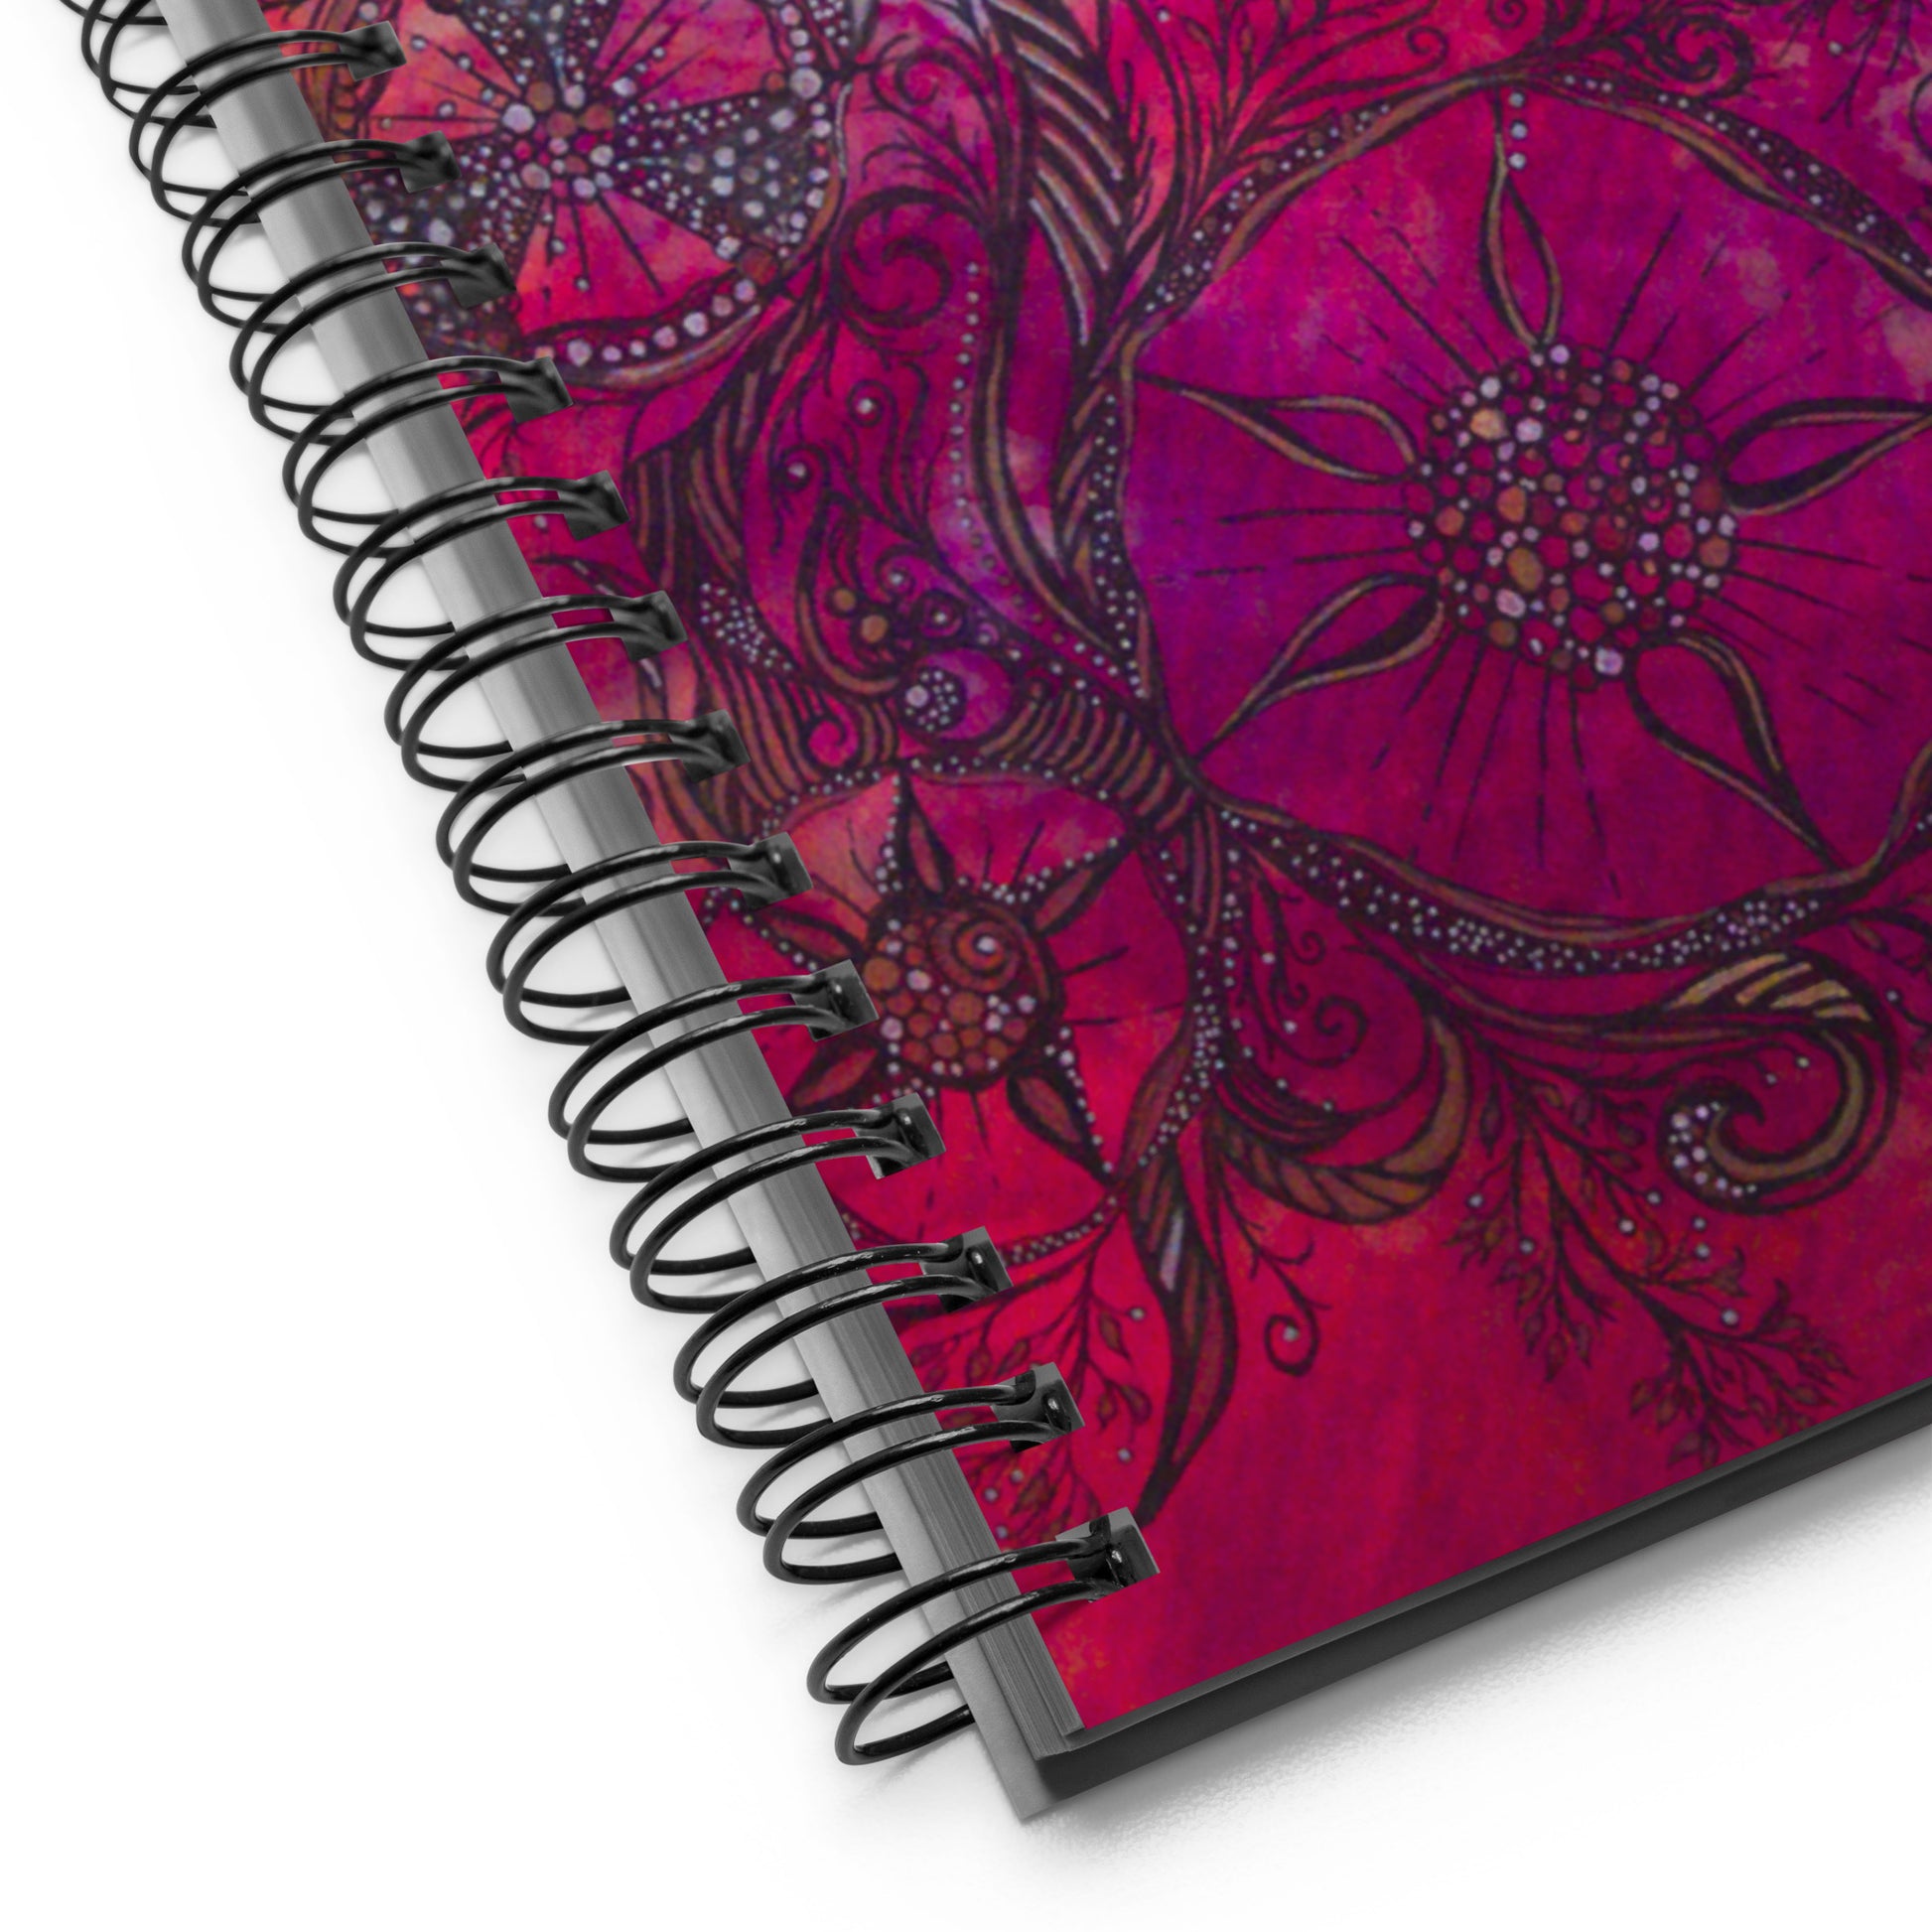 Shades of Spring Fiber Art Spiral Notebook - Dotted Paper - Studio Lams Creative Collective